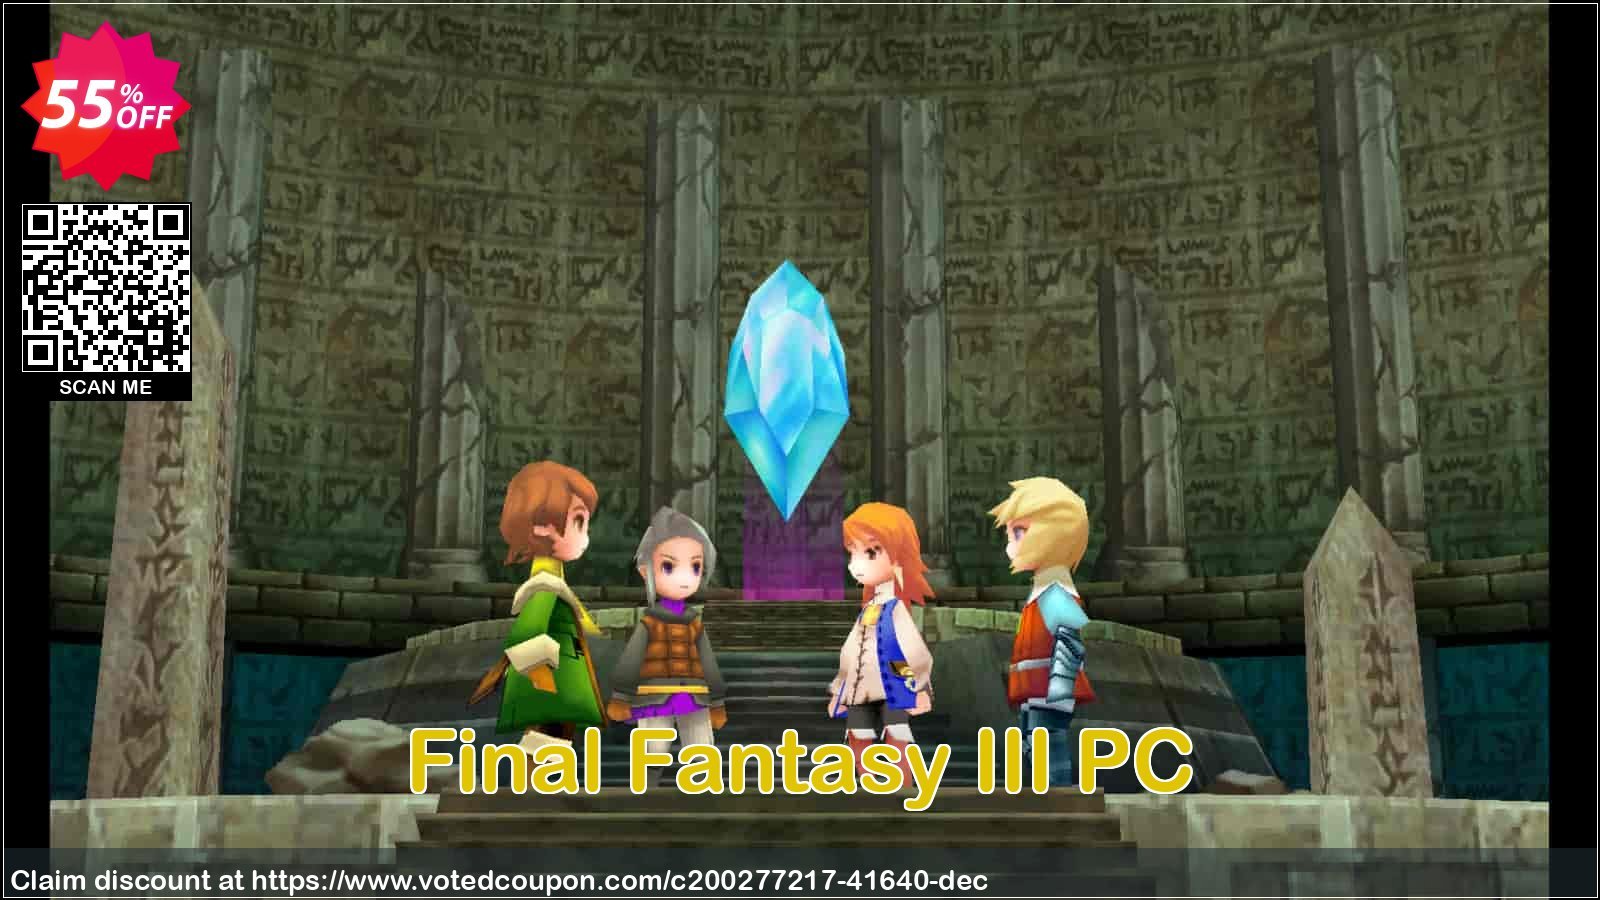 Final Fantasy III PC Coupon Code May 2024, 55% OFF - VotedCoupon